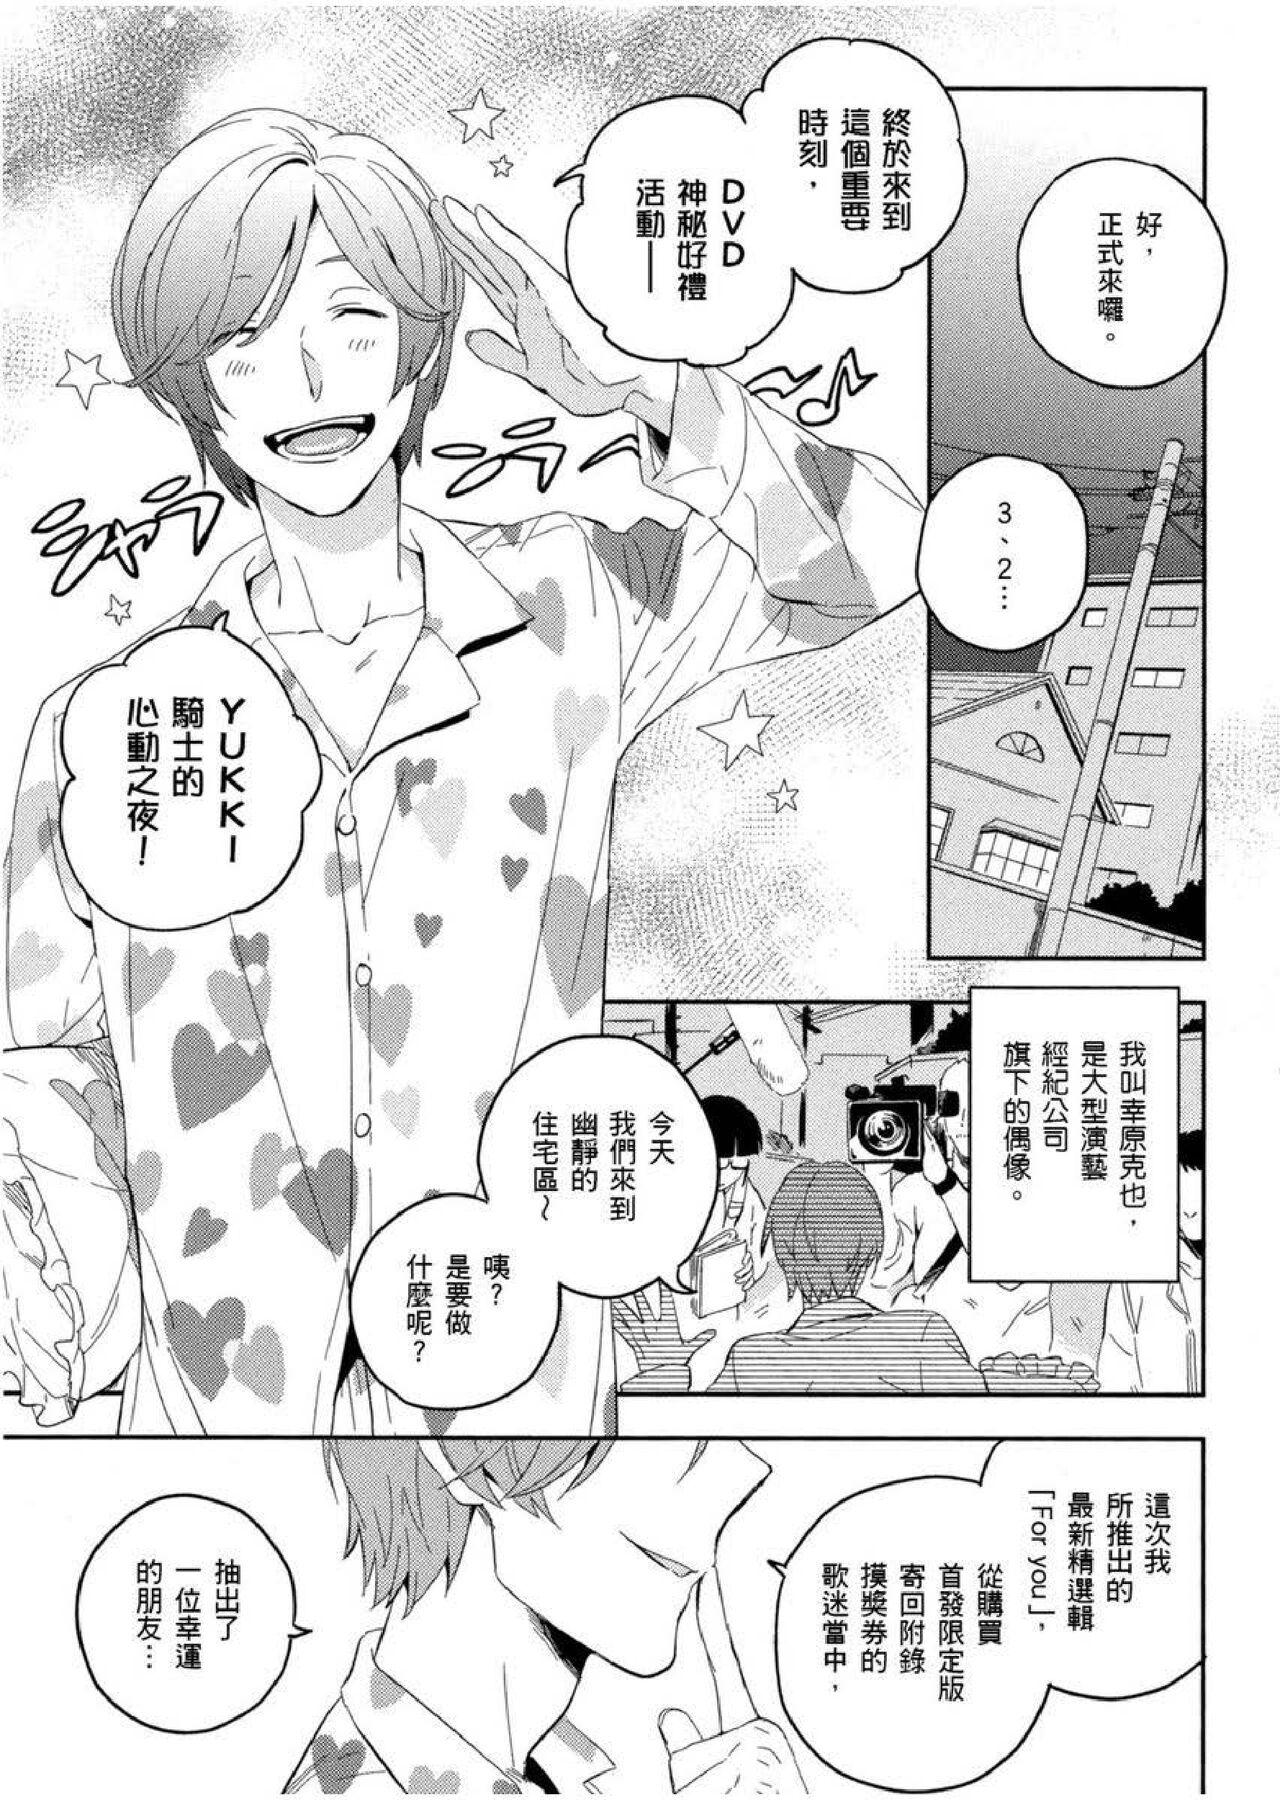 Rebolando Soine Lovers | 陪睡Lovers Cei - Page 6